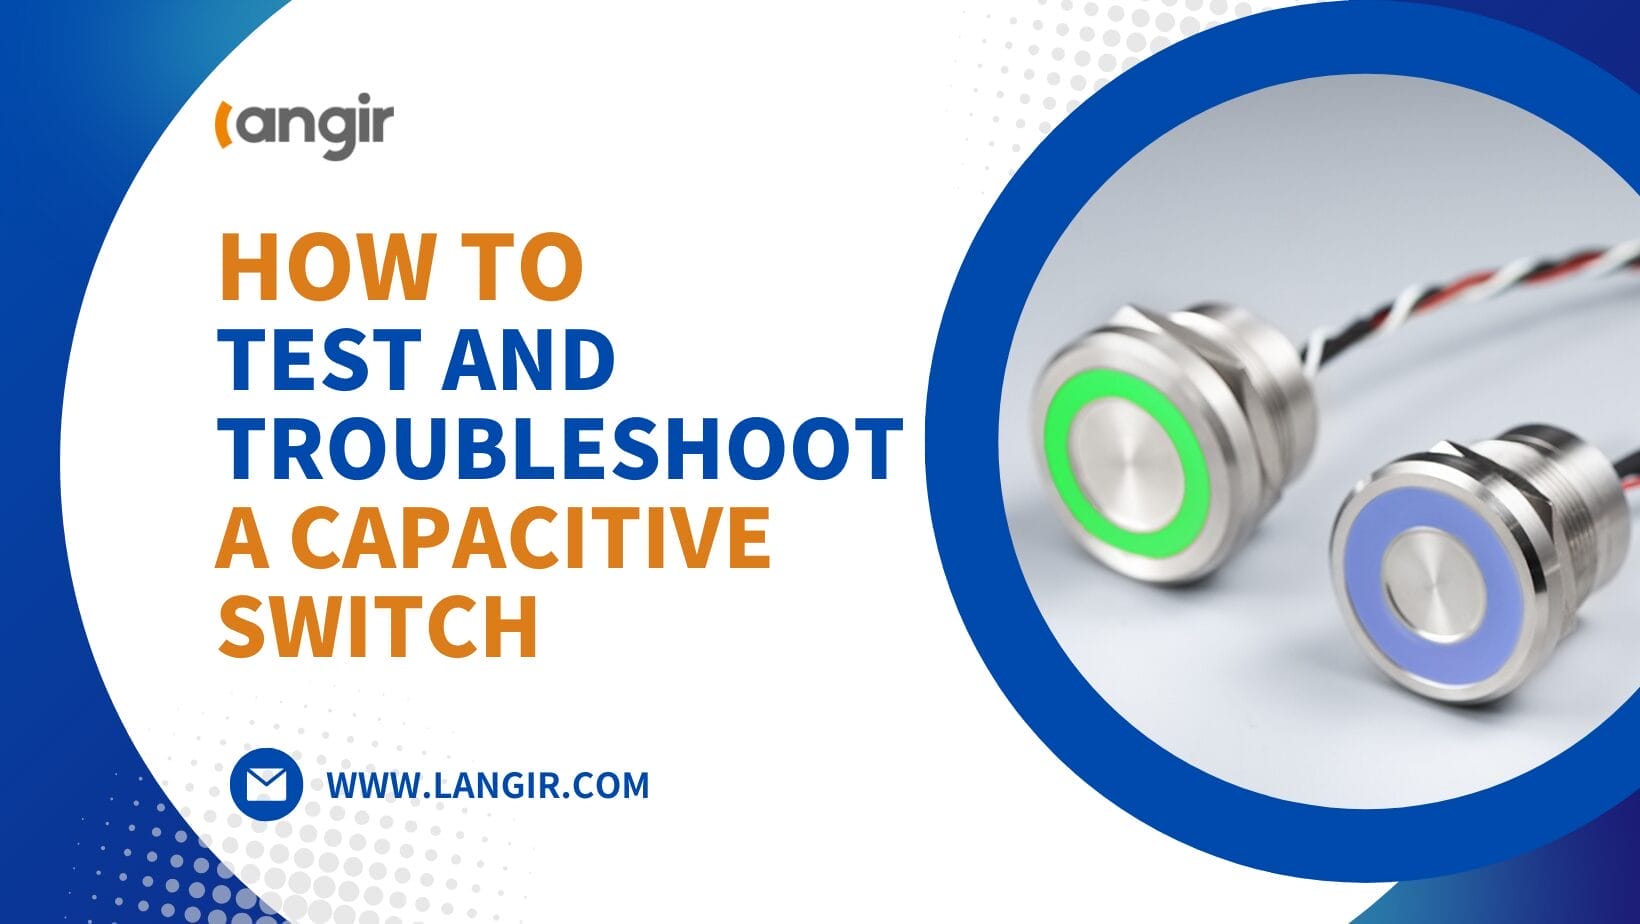 How to Test and Troubleshoot a Capacitive Switch - Langir